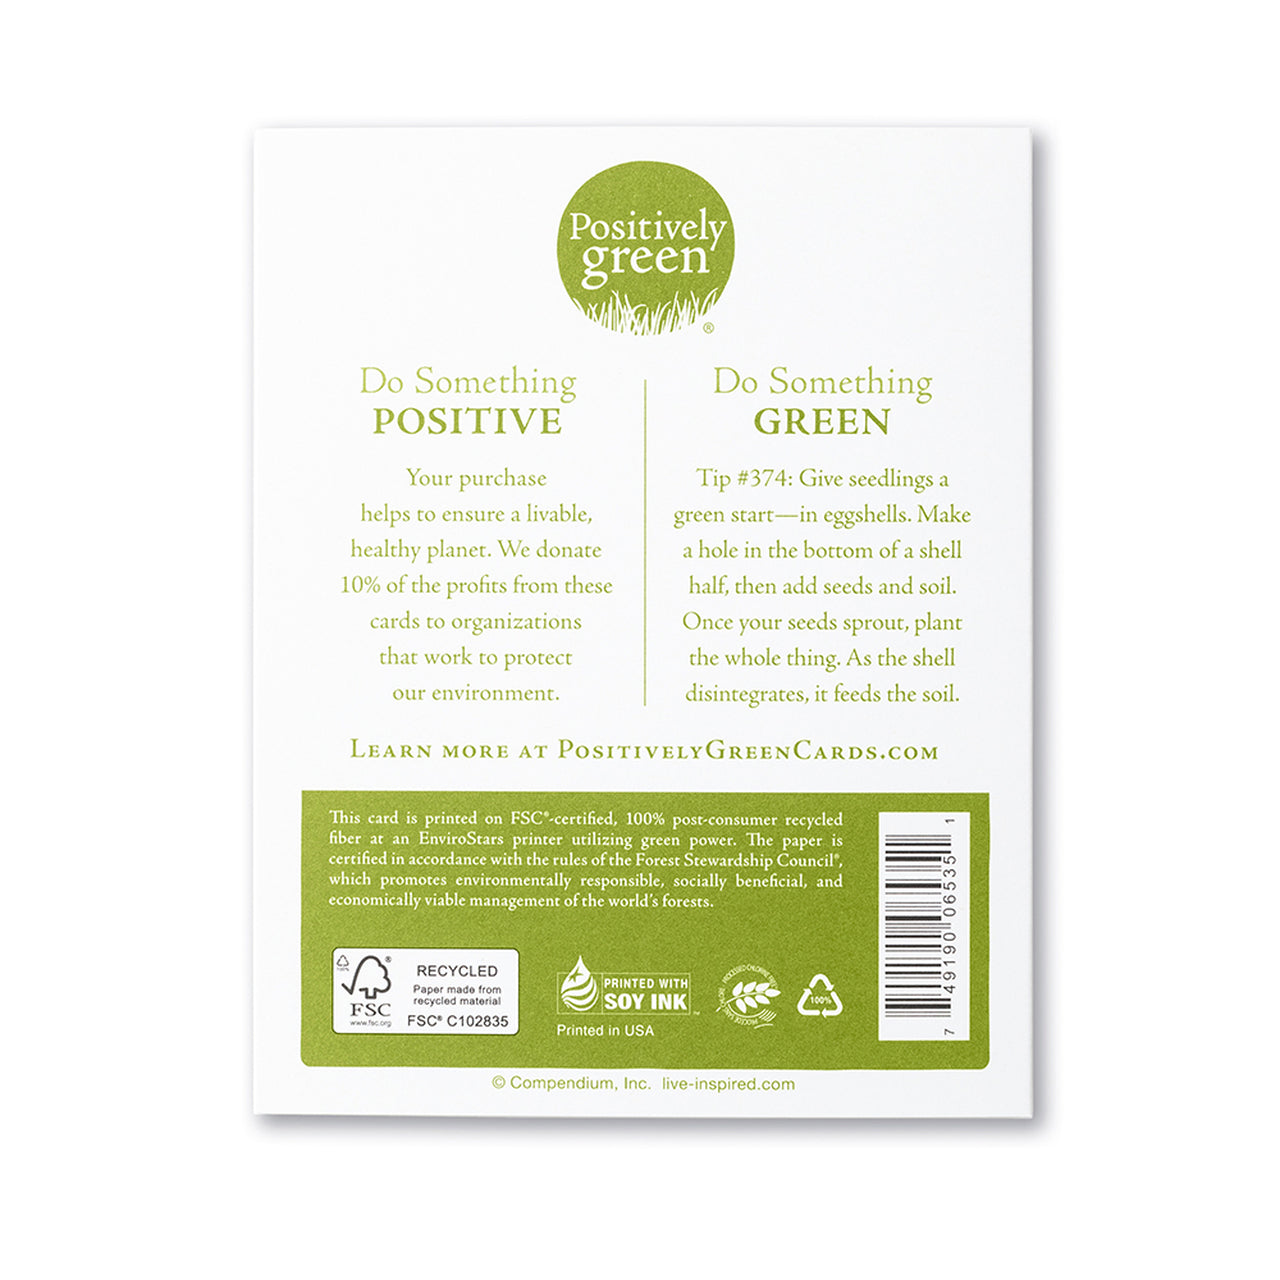 Positively Green Greeting Card - Wedding - "Once In A While, Right In The Middle Of An Ordinary Life, Love Gives Us A Fairytale" -Unknown - Mellow Monkey